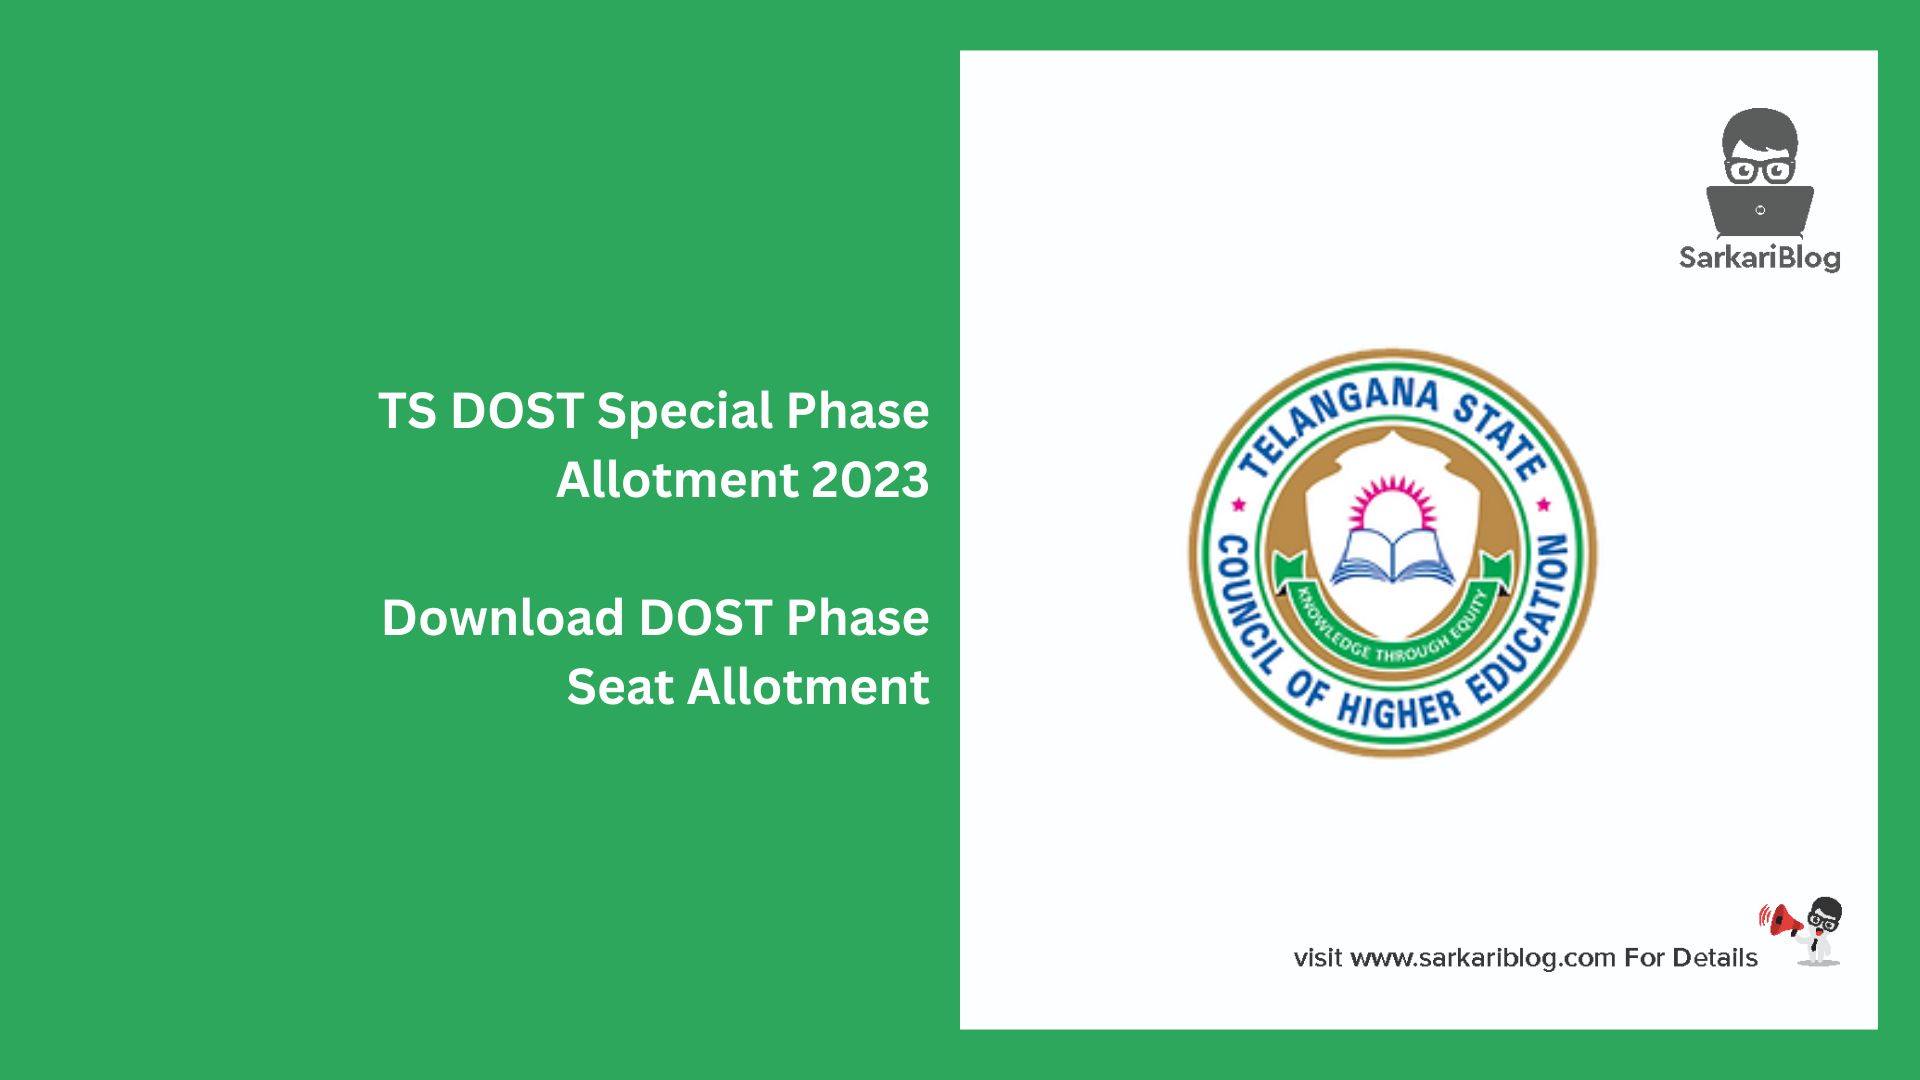 TS DOST Special Phase Allotment 2023